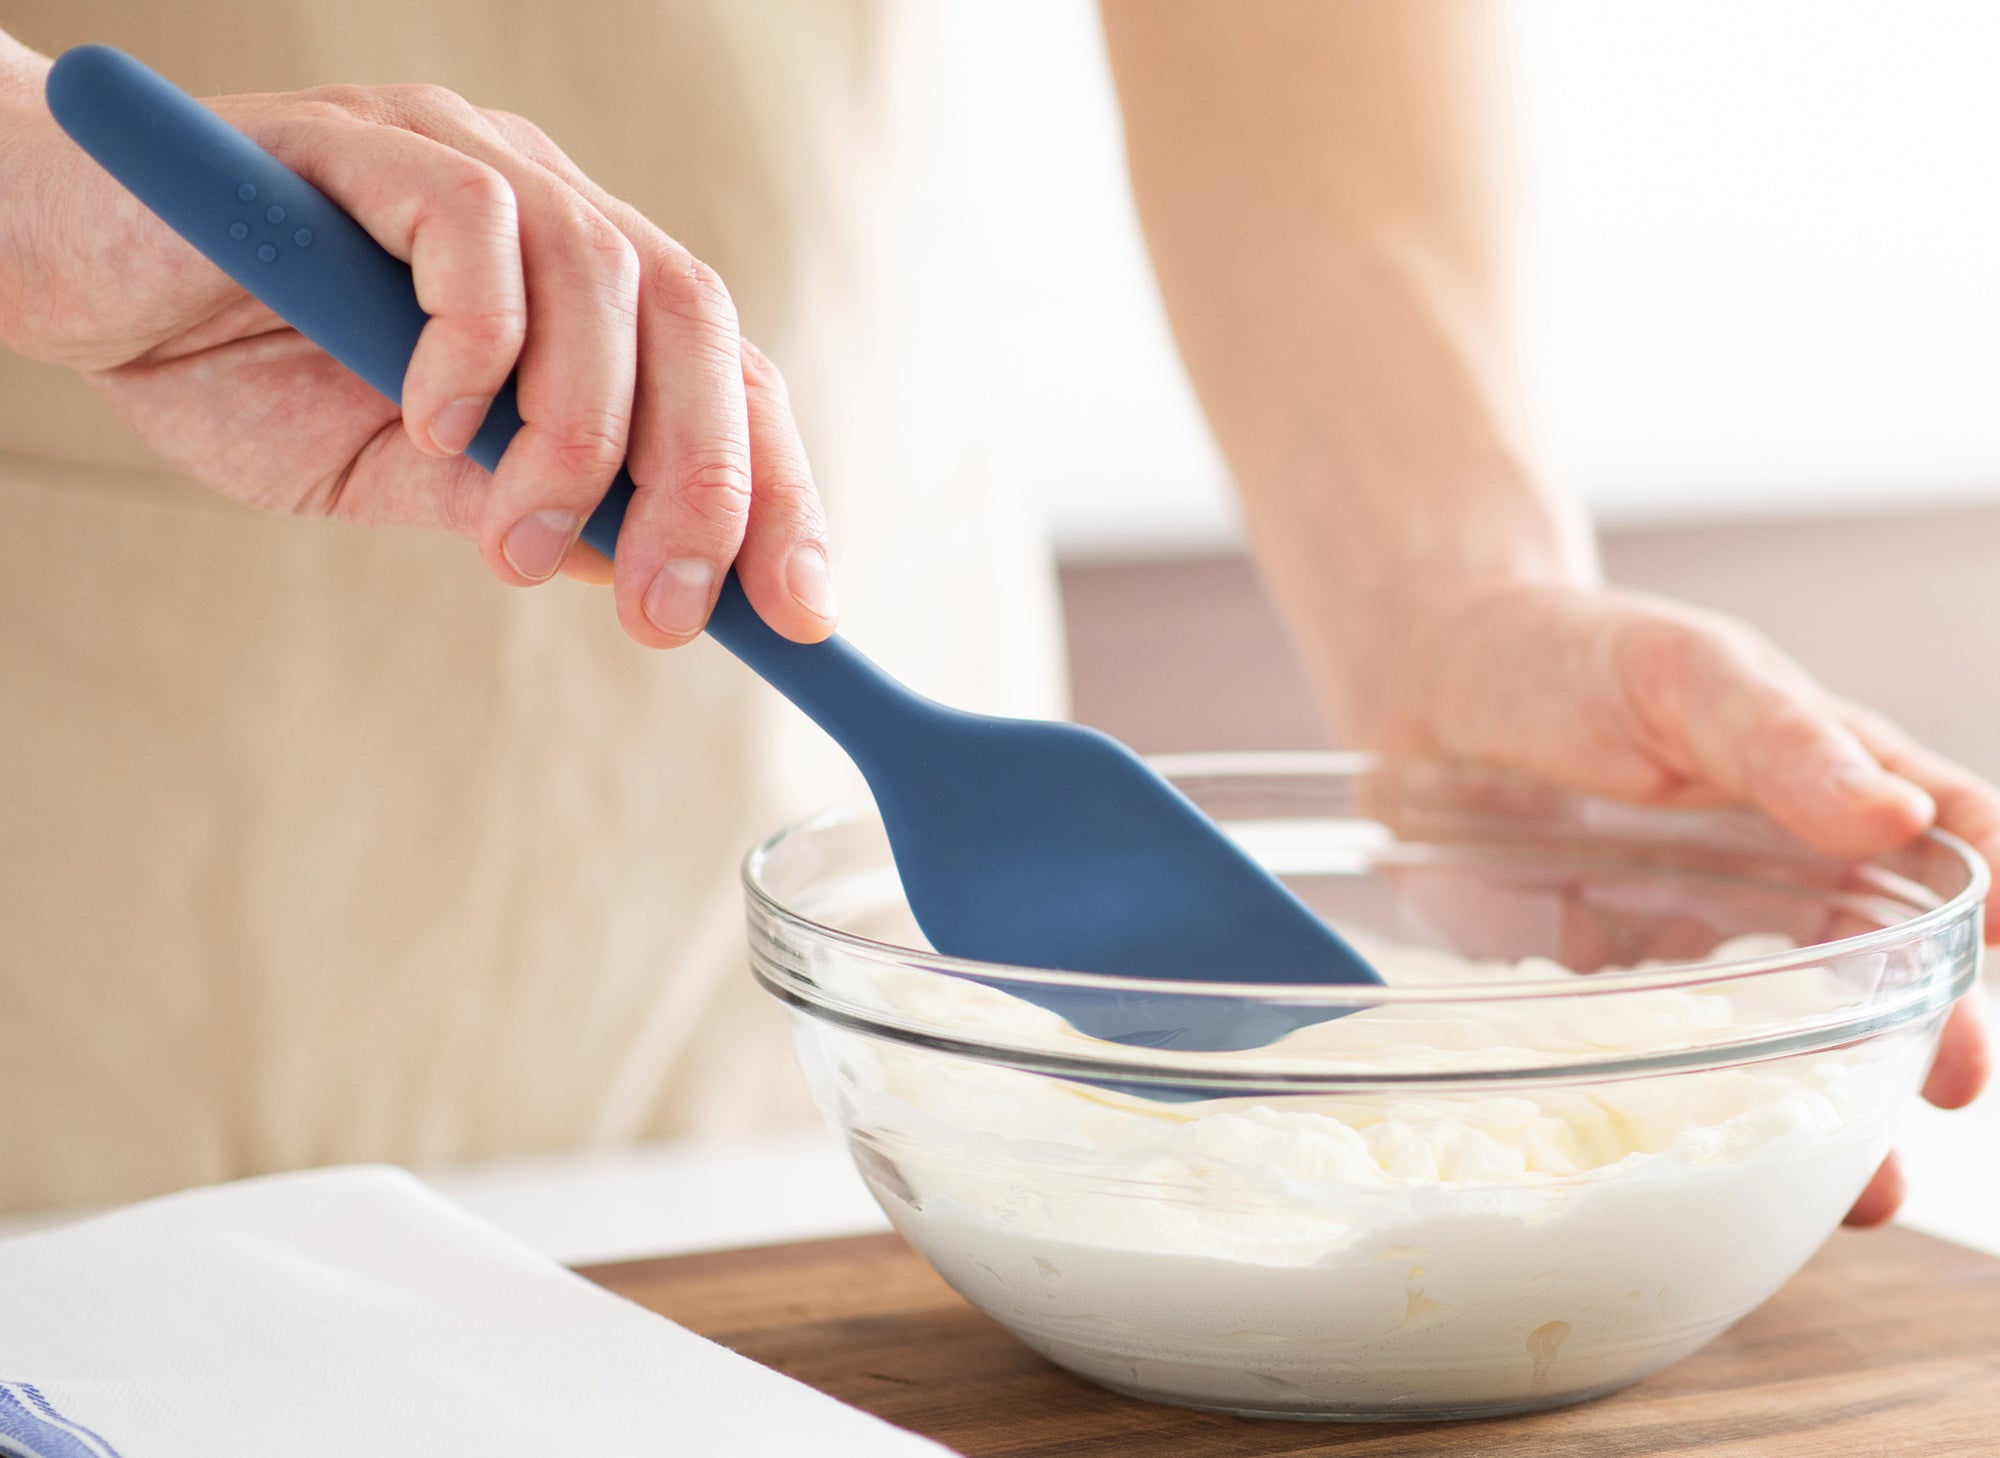 {{blue,black,gray}} Hand using a Blue Misen Mixing Spatula to stir dough in a glass bowl on a kitchen countertop.